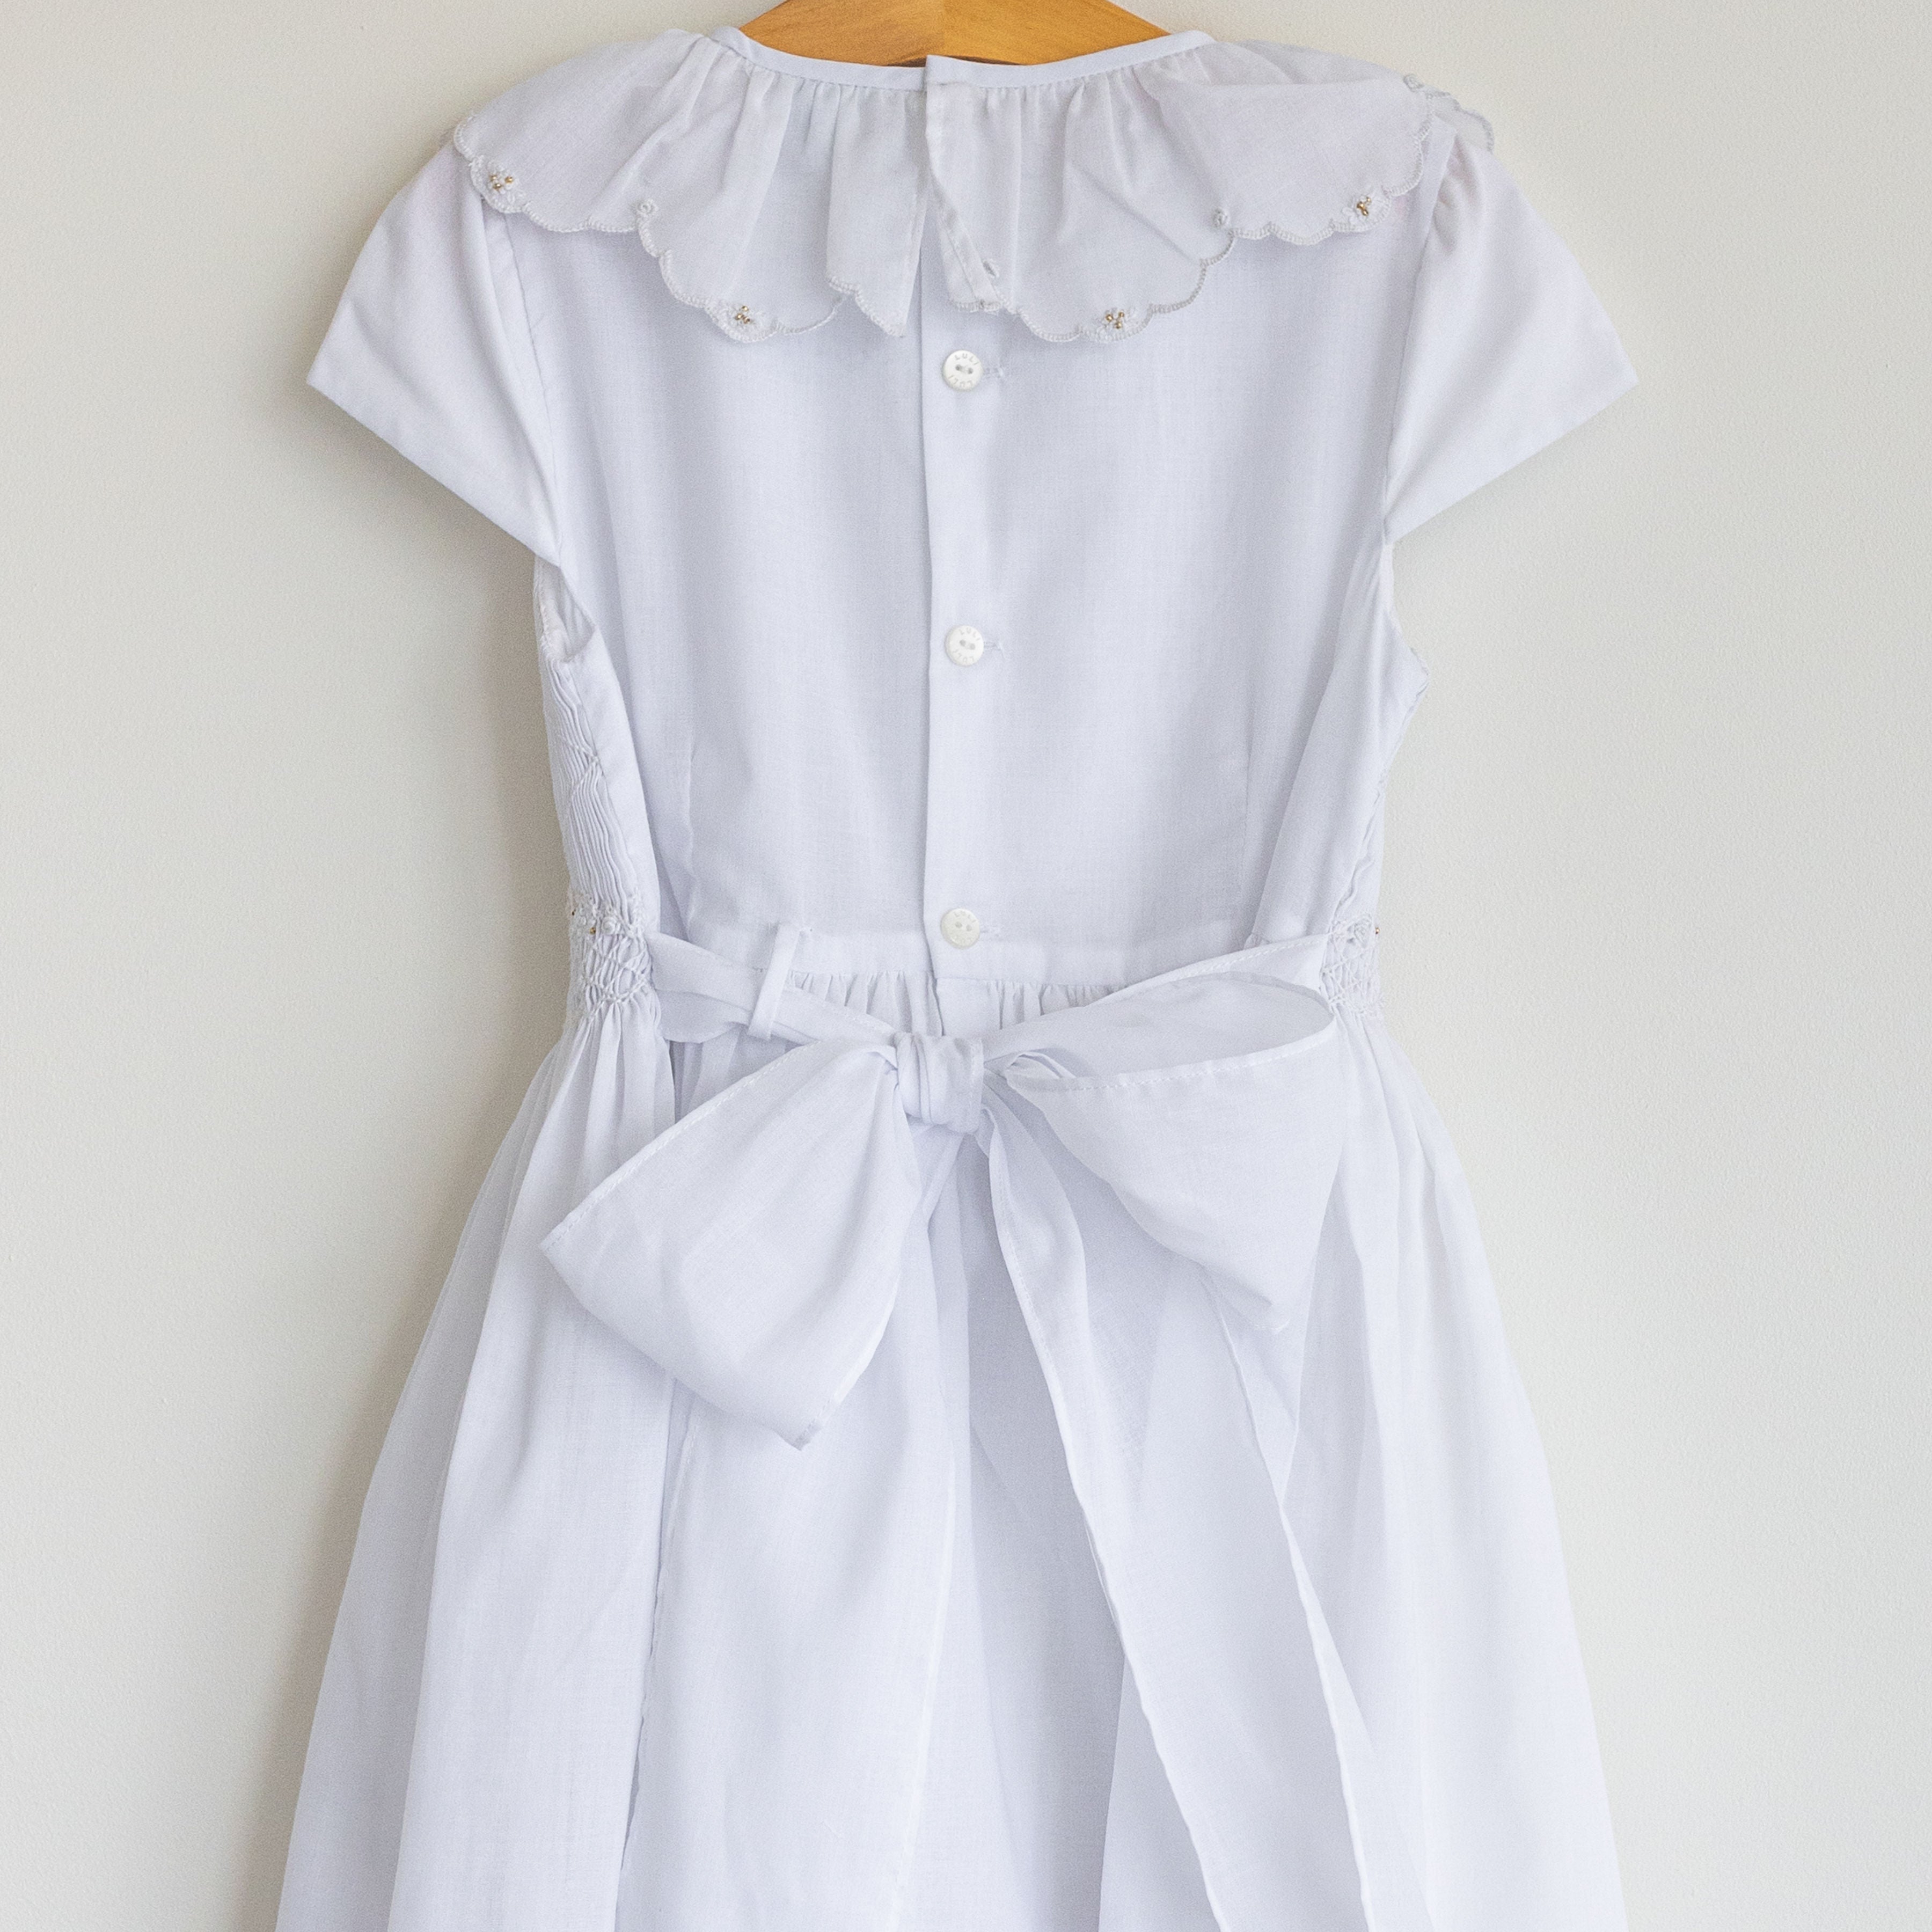 White Dress Smocked With Scallop Collar